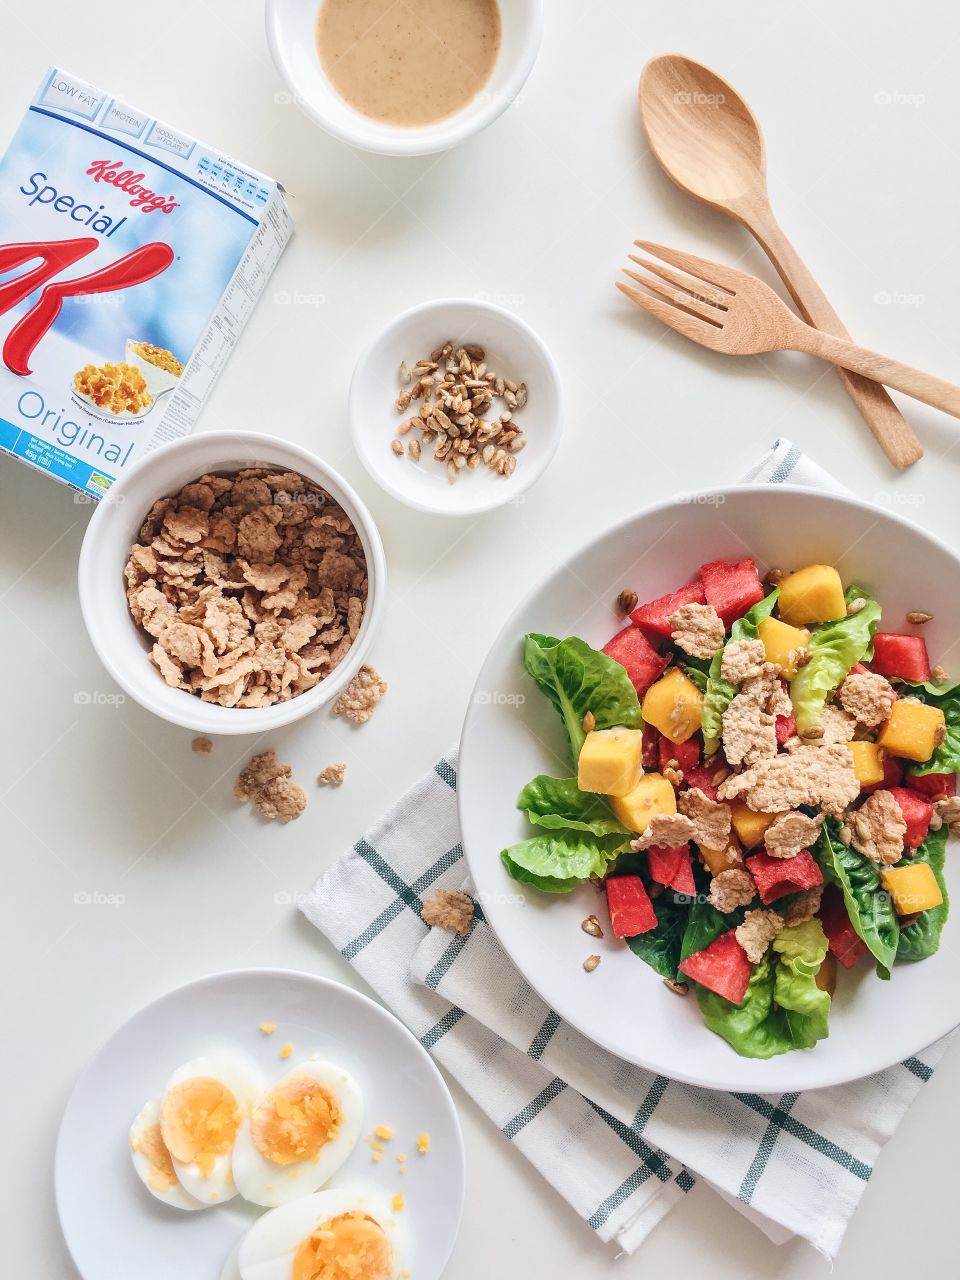 Reimagining cereal : Colorful healthy salad with Kellogg's Special K.
(Ingredients : Kellogg's Special K, lettuces, watermelon and mango sprinkling with sunflower kernels.)
